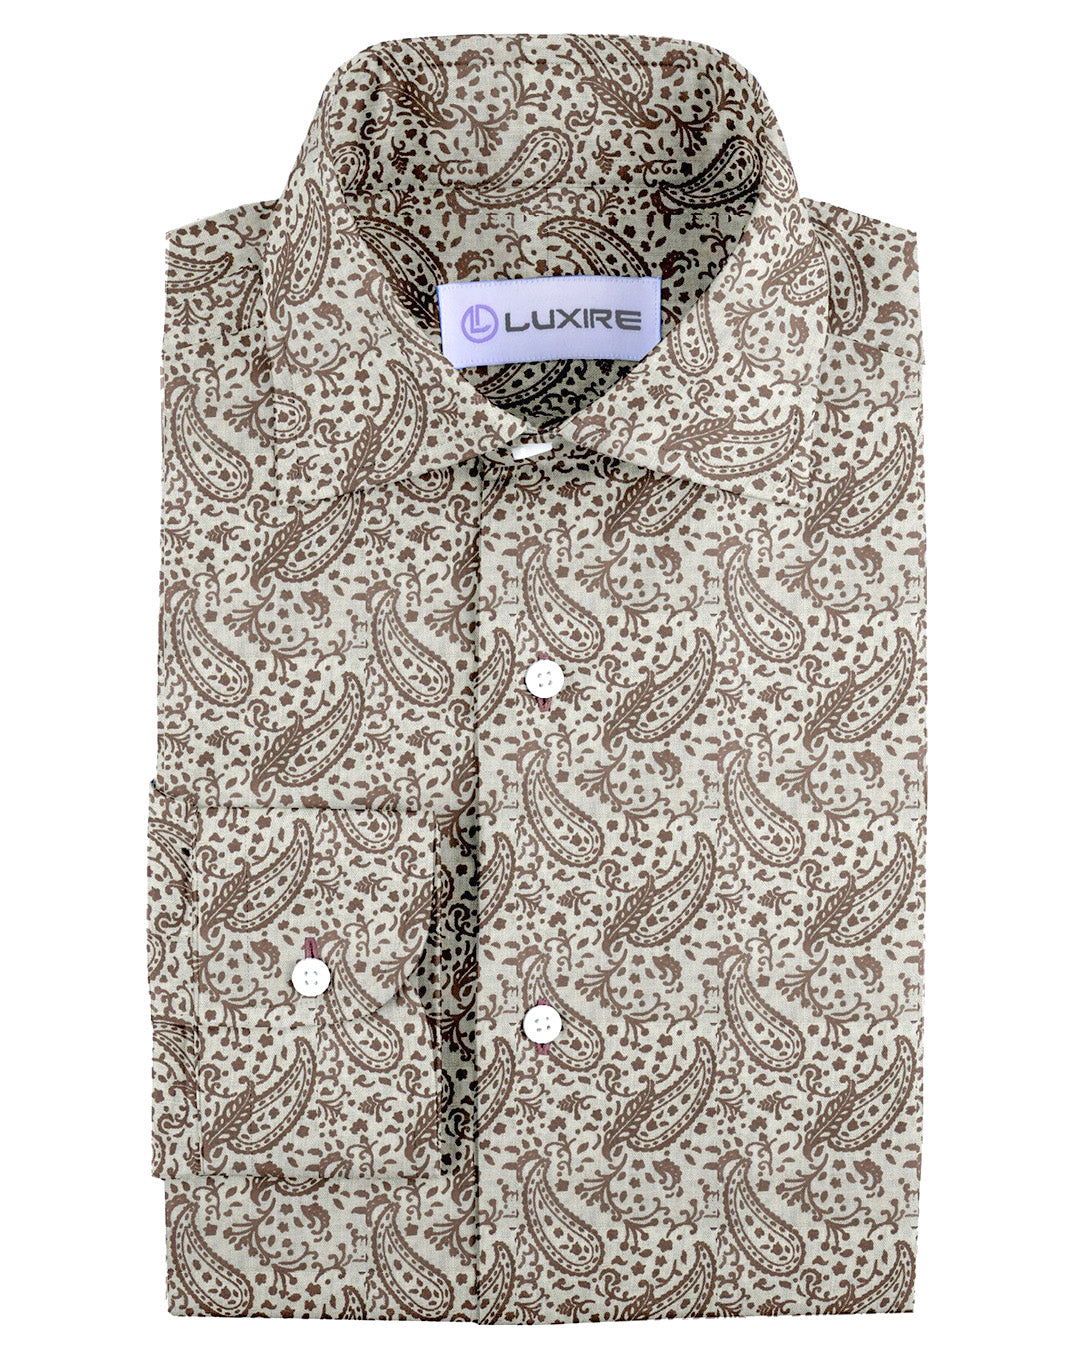 Front view of custom linen shirt for men in brown printed paisley